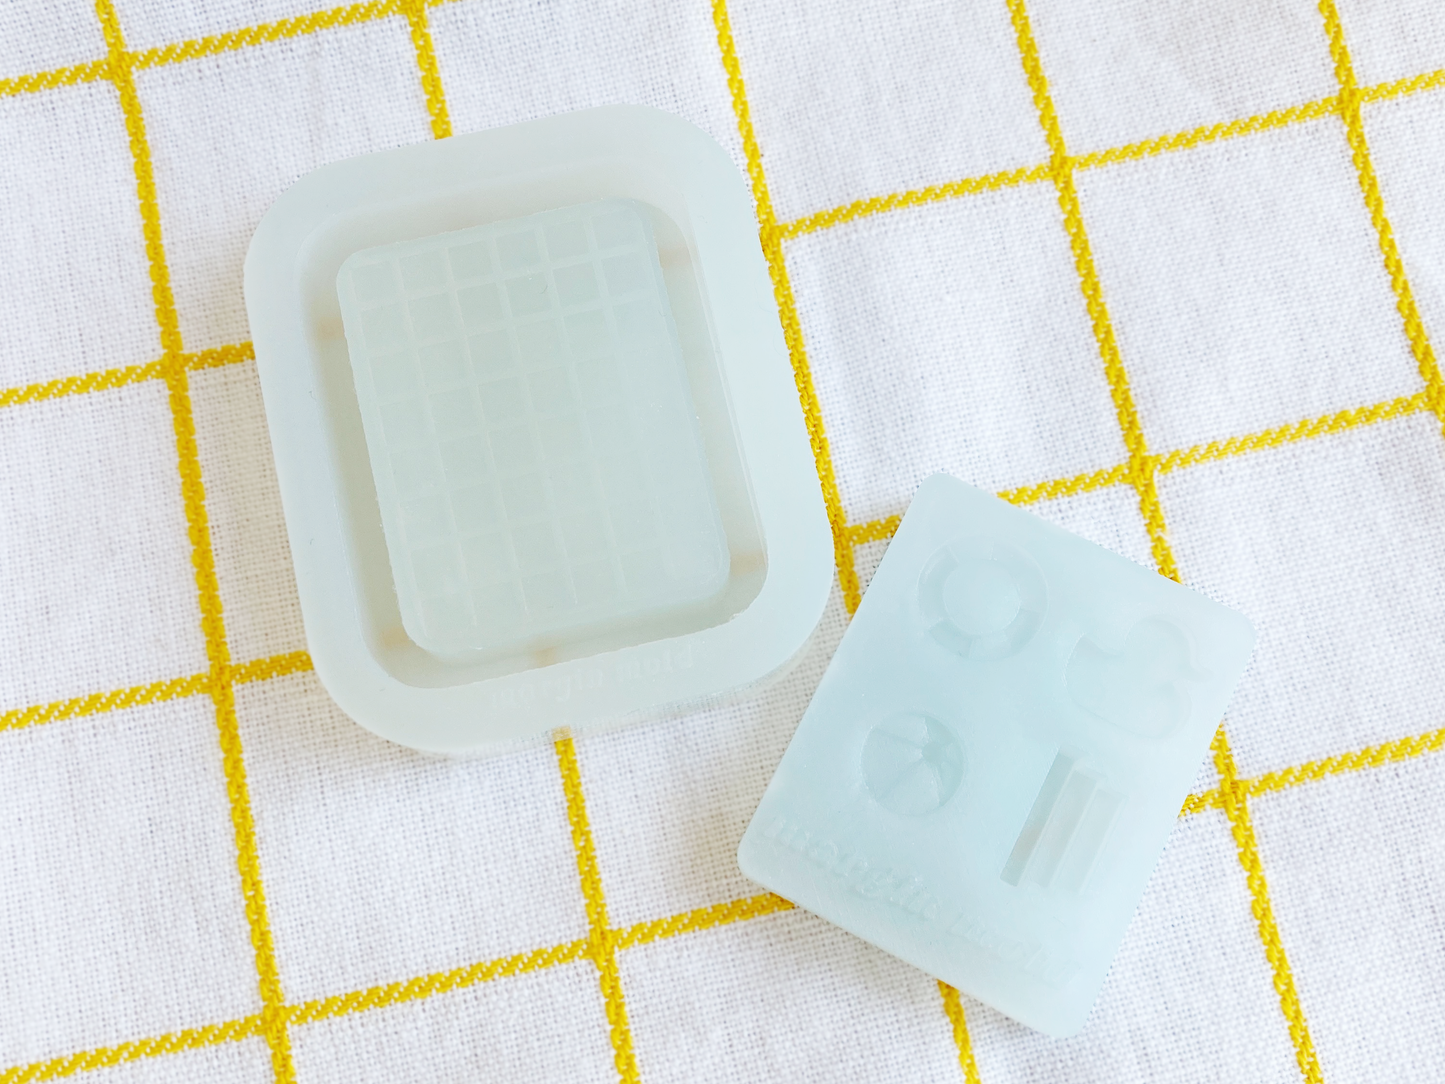 Pool Shaker Mold and Pool Toys Shaker Bits Set, UV Resin Silicone Mold